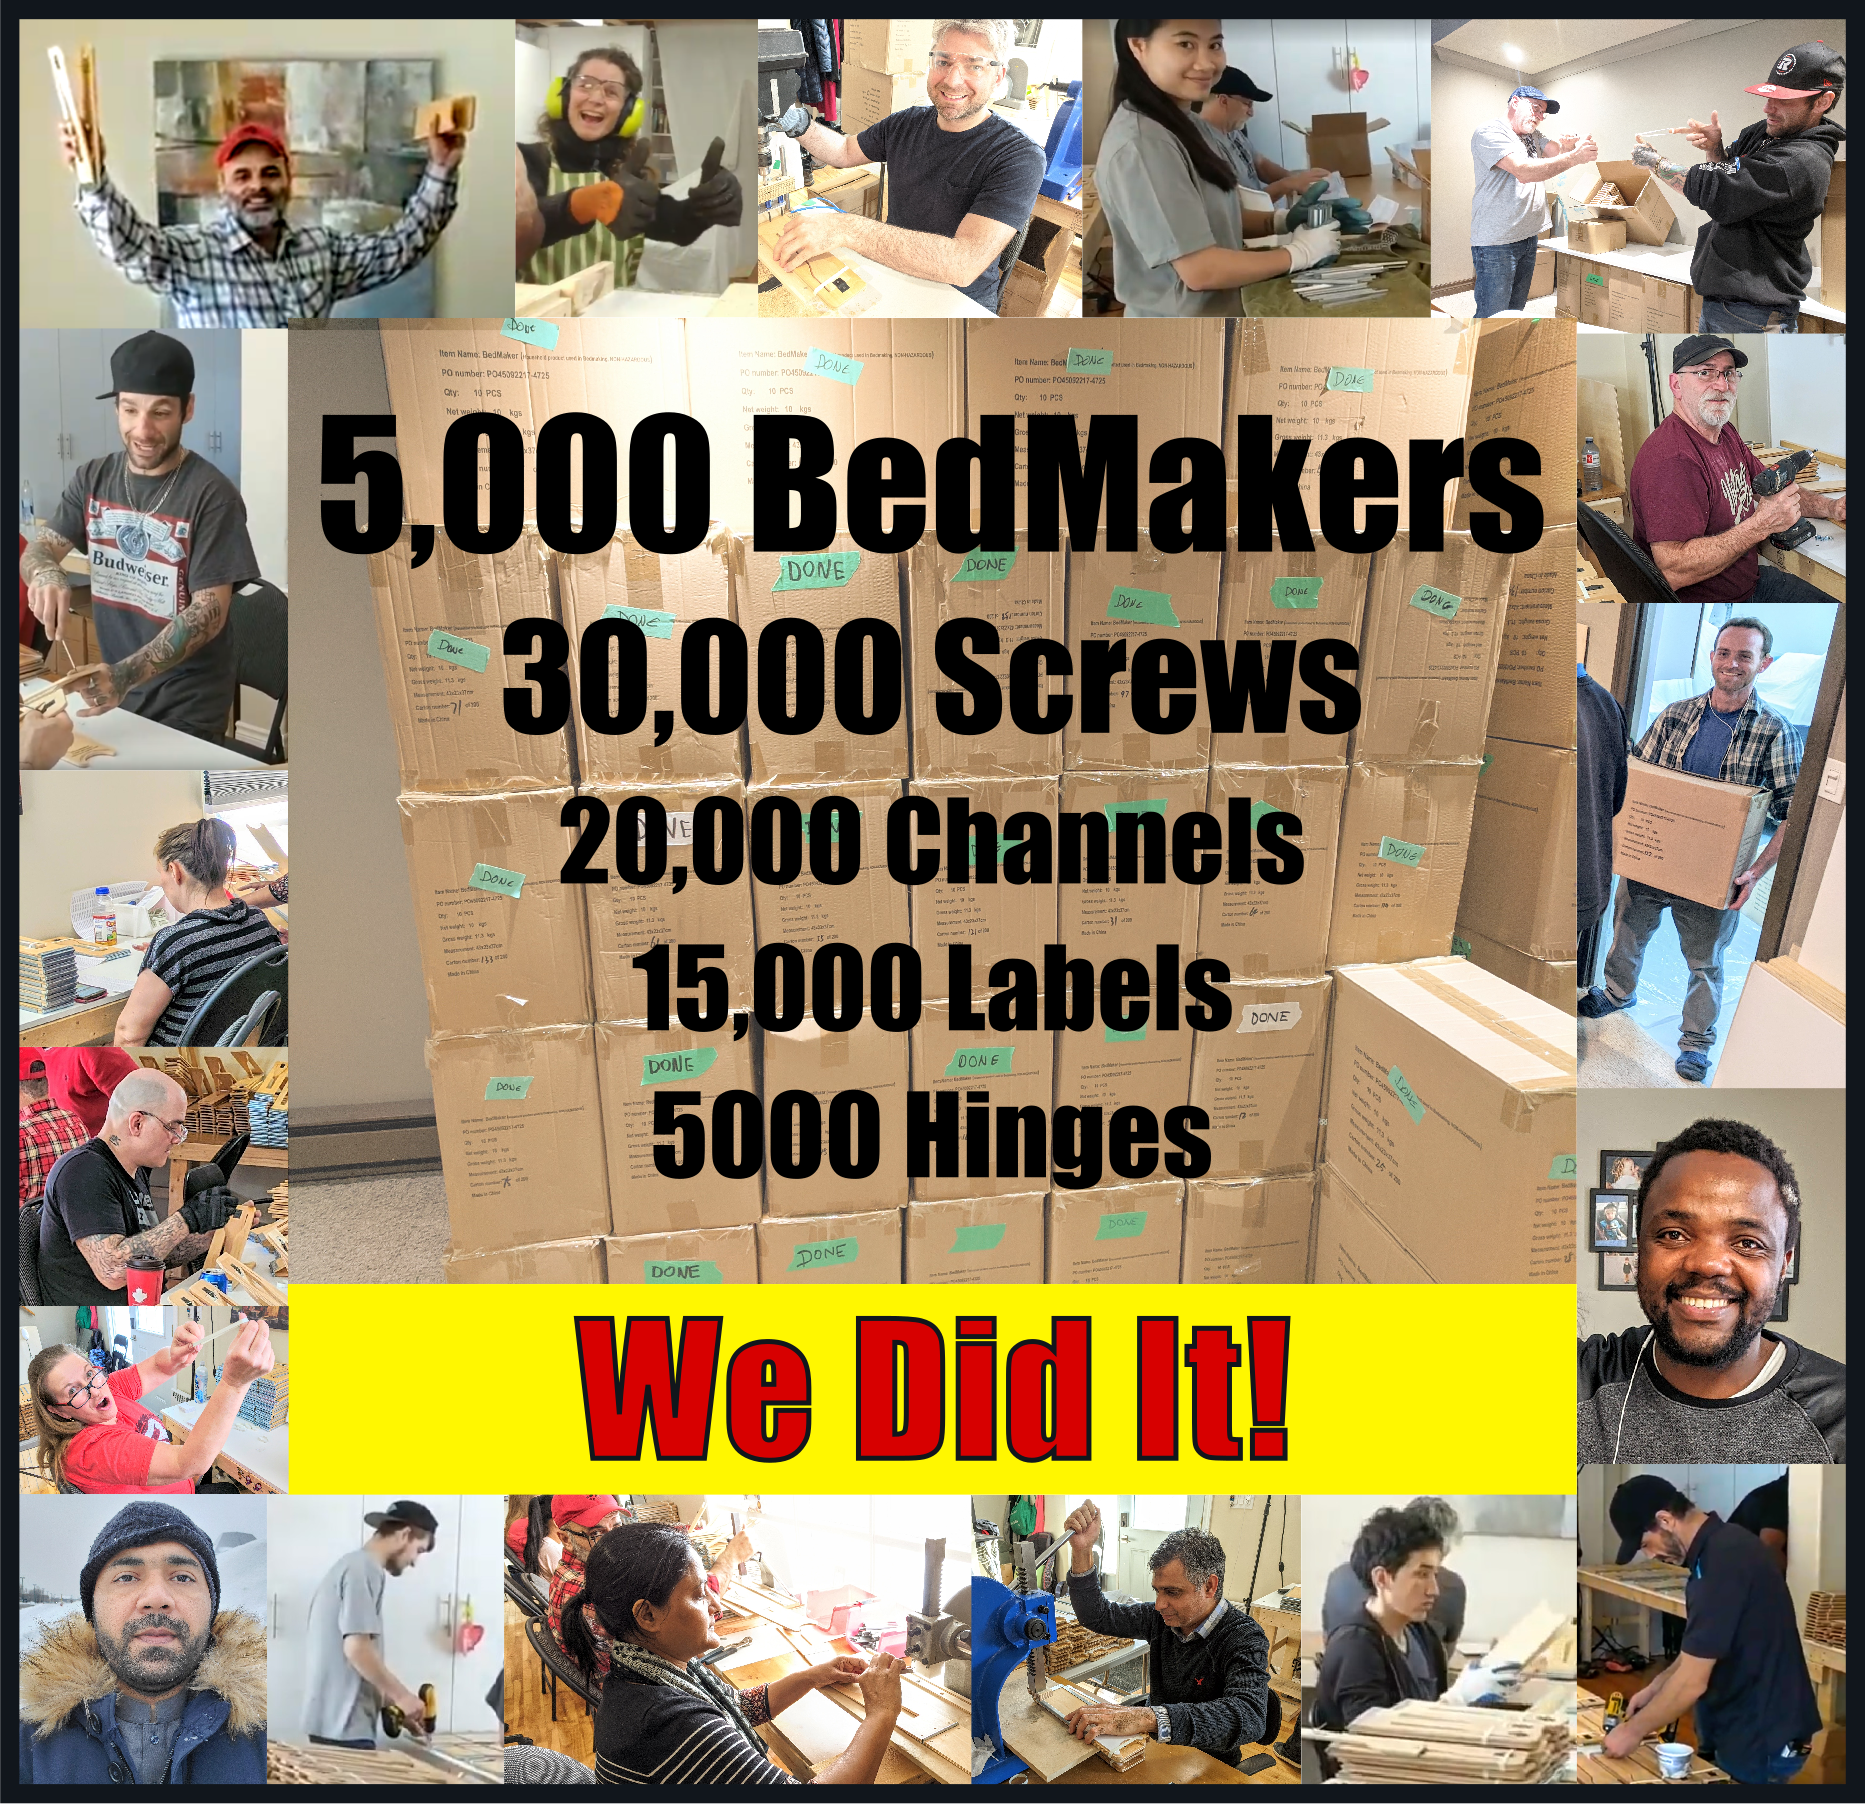 5000 BedMakers - We Did It!